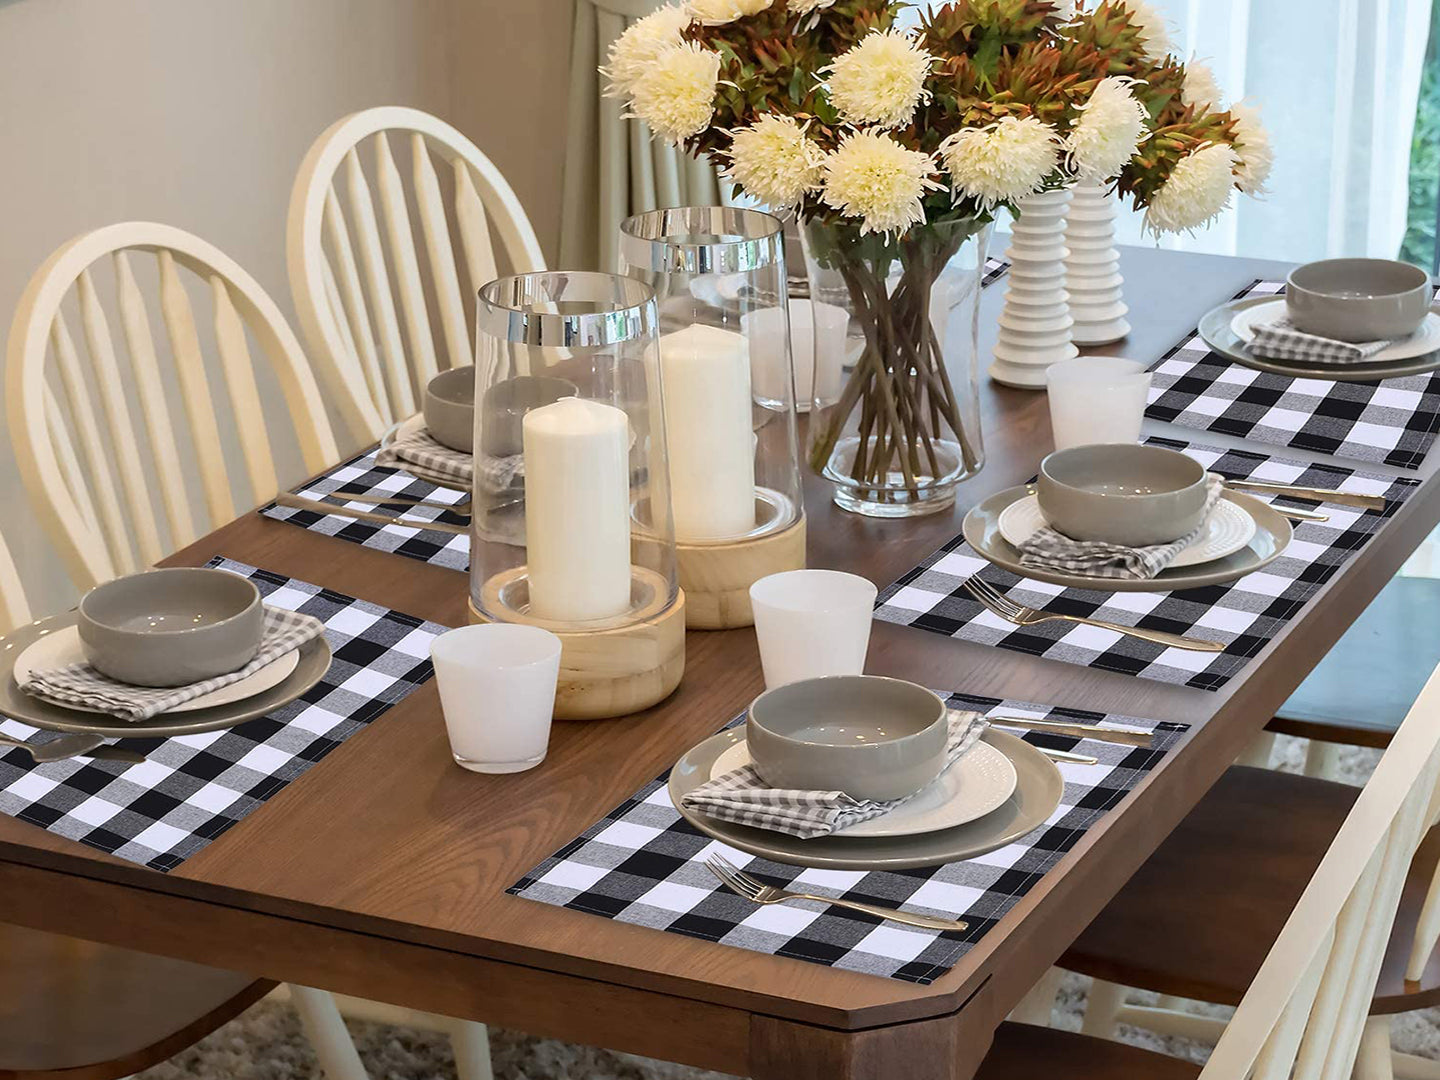 Lushomes Buffalo Checks Black & White Plaid Dinning Table Place Mats, dish drying mat for kitchen, fridge mat, Apt for 4 seater dining table (Pack of 6 Ribbed Dinning Mats, 13 x 18”, 33 x 48 cms)